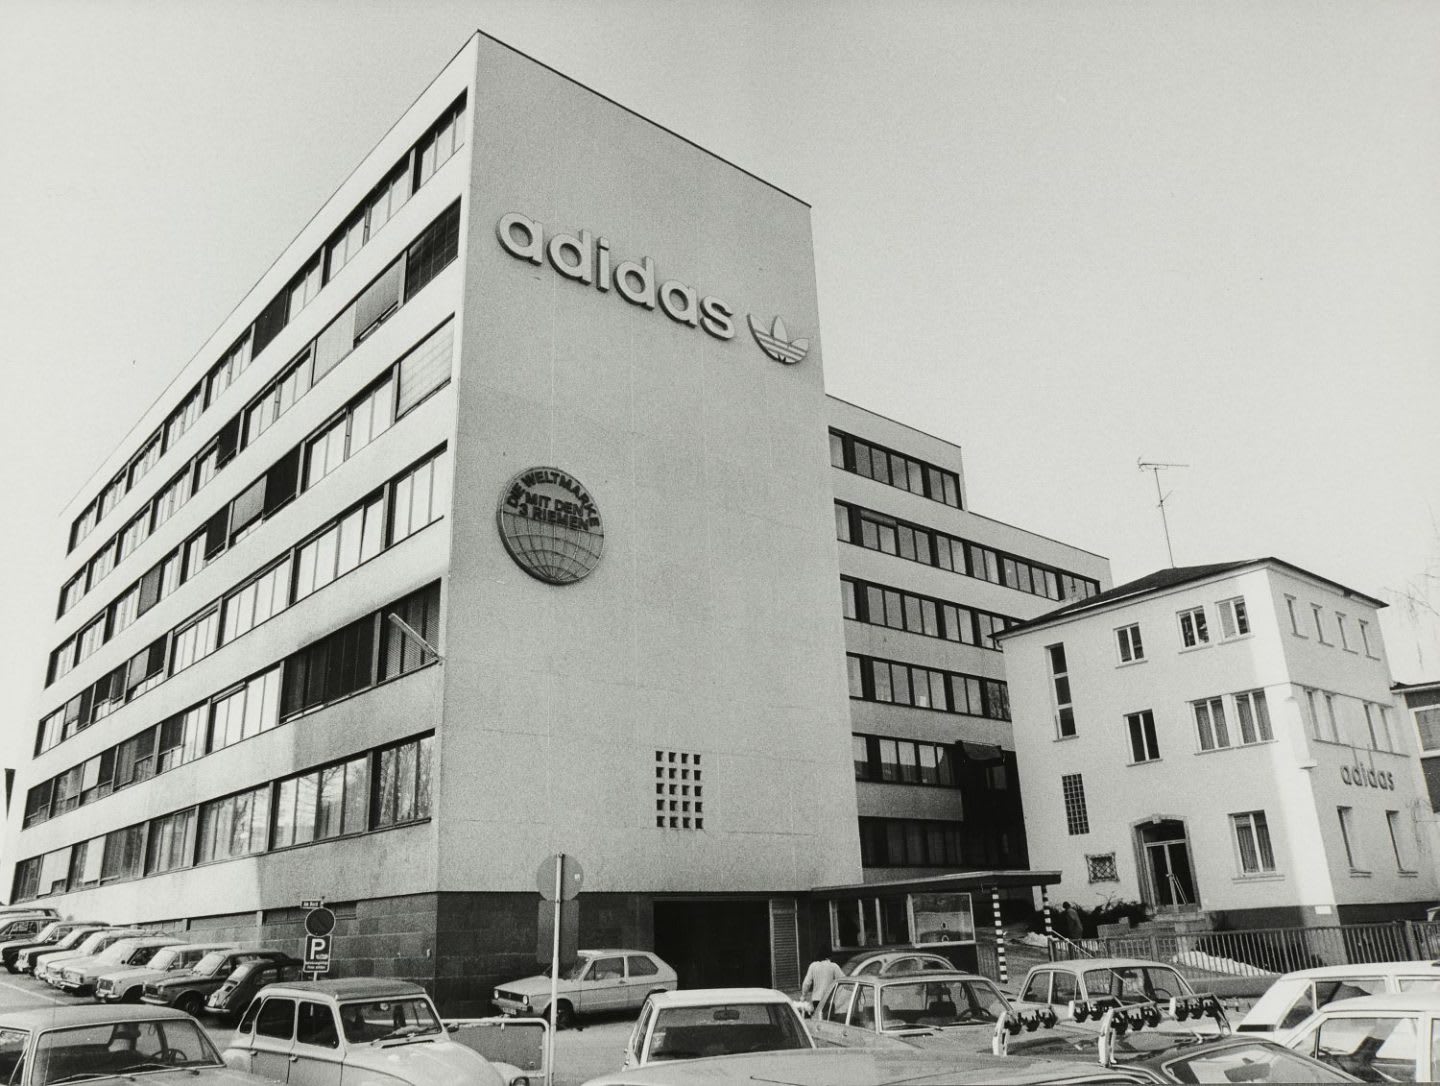 Old fashioned picture of building with adidas logo, Herzogenaurach, 1977, Adolf, Dassler, Adi, adidas, sports, shoes, shoemaker, history, archive